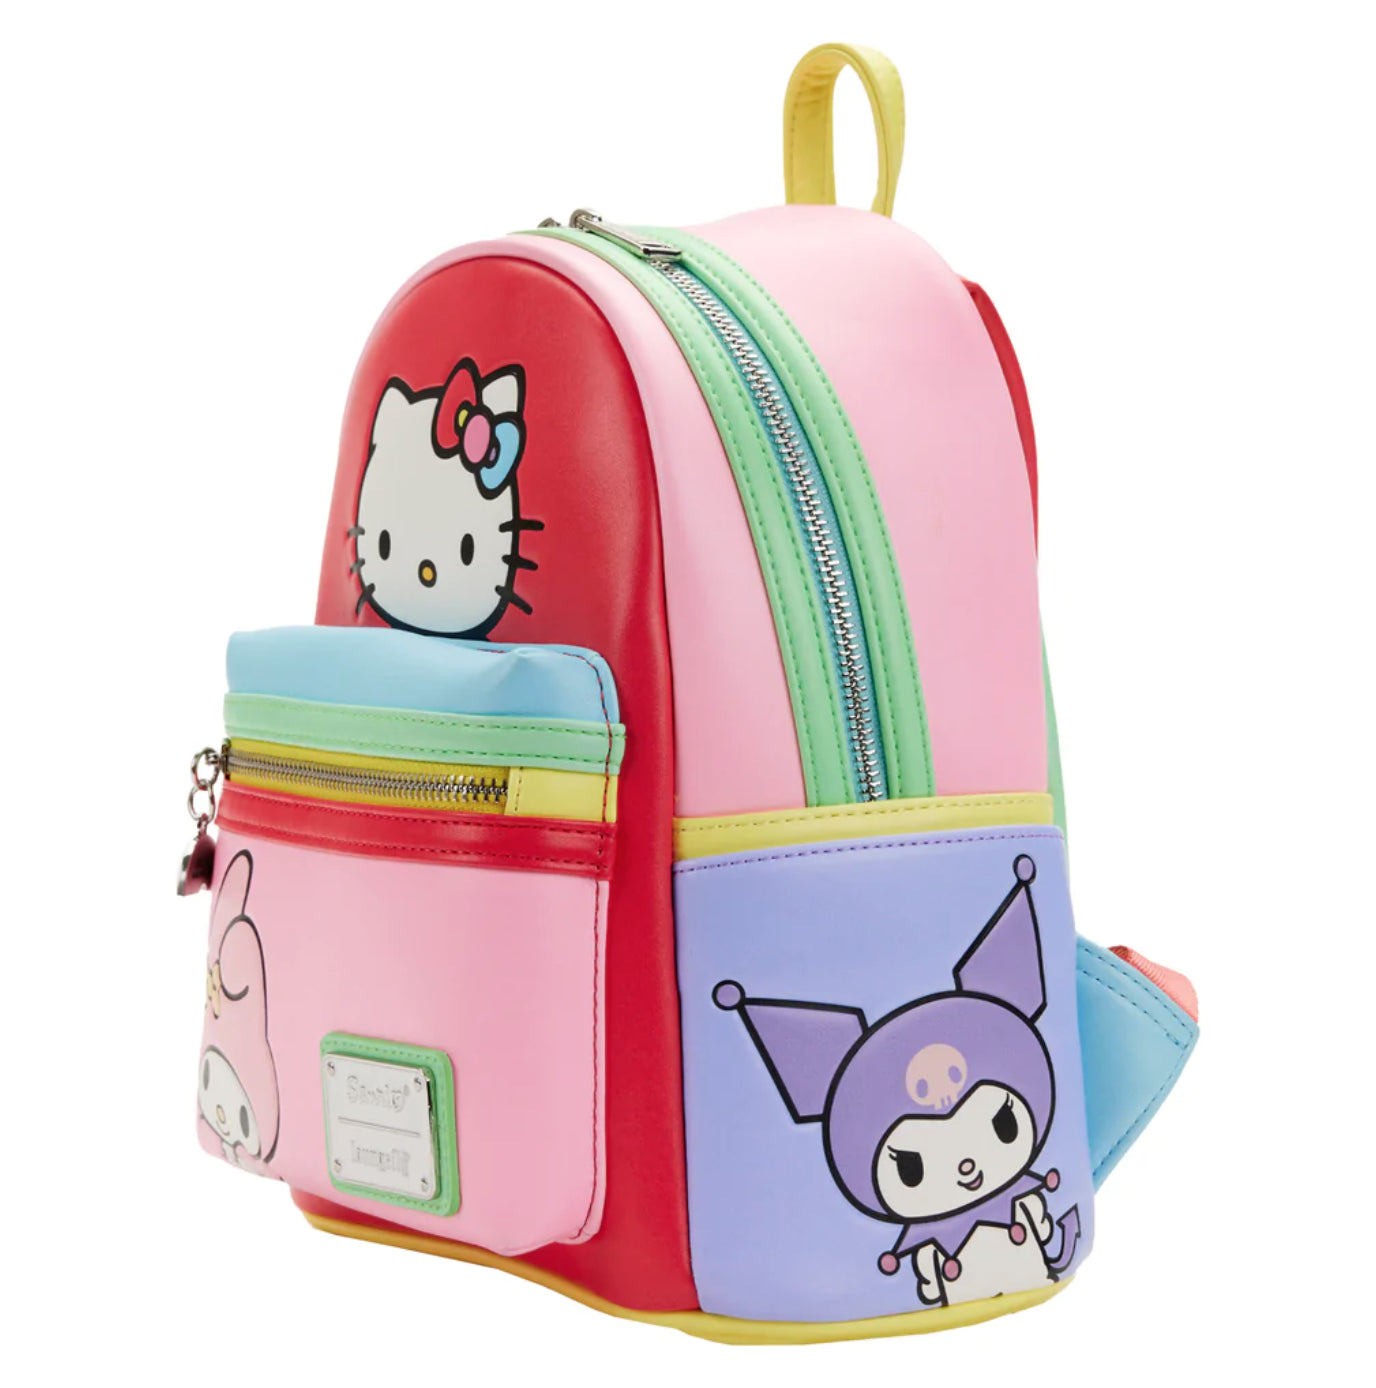 HELLO KITTY AND FRIENDS COLOR BLOCK MINI BACKPACK